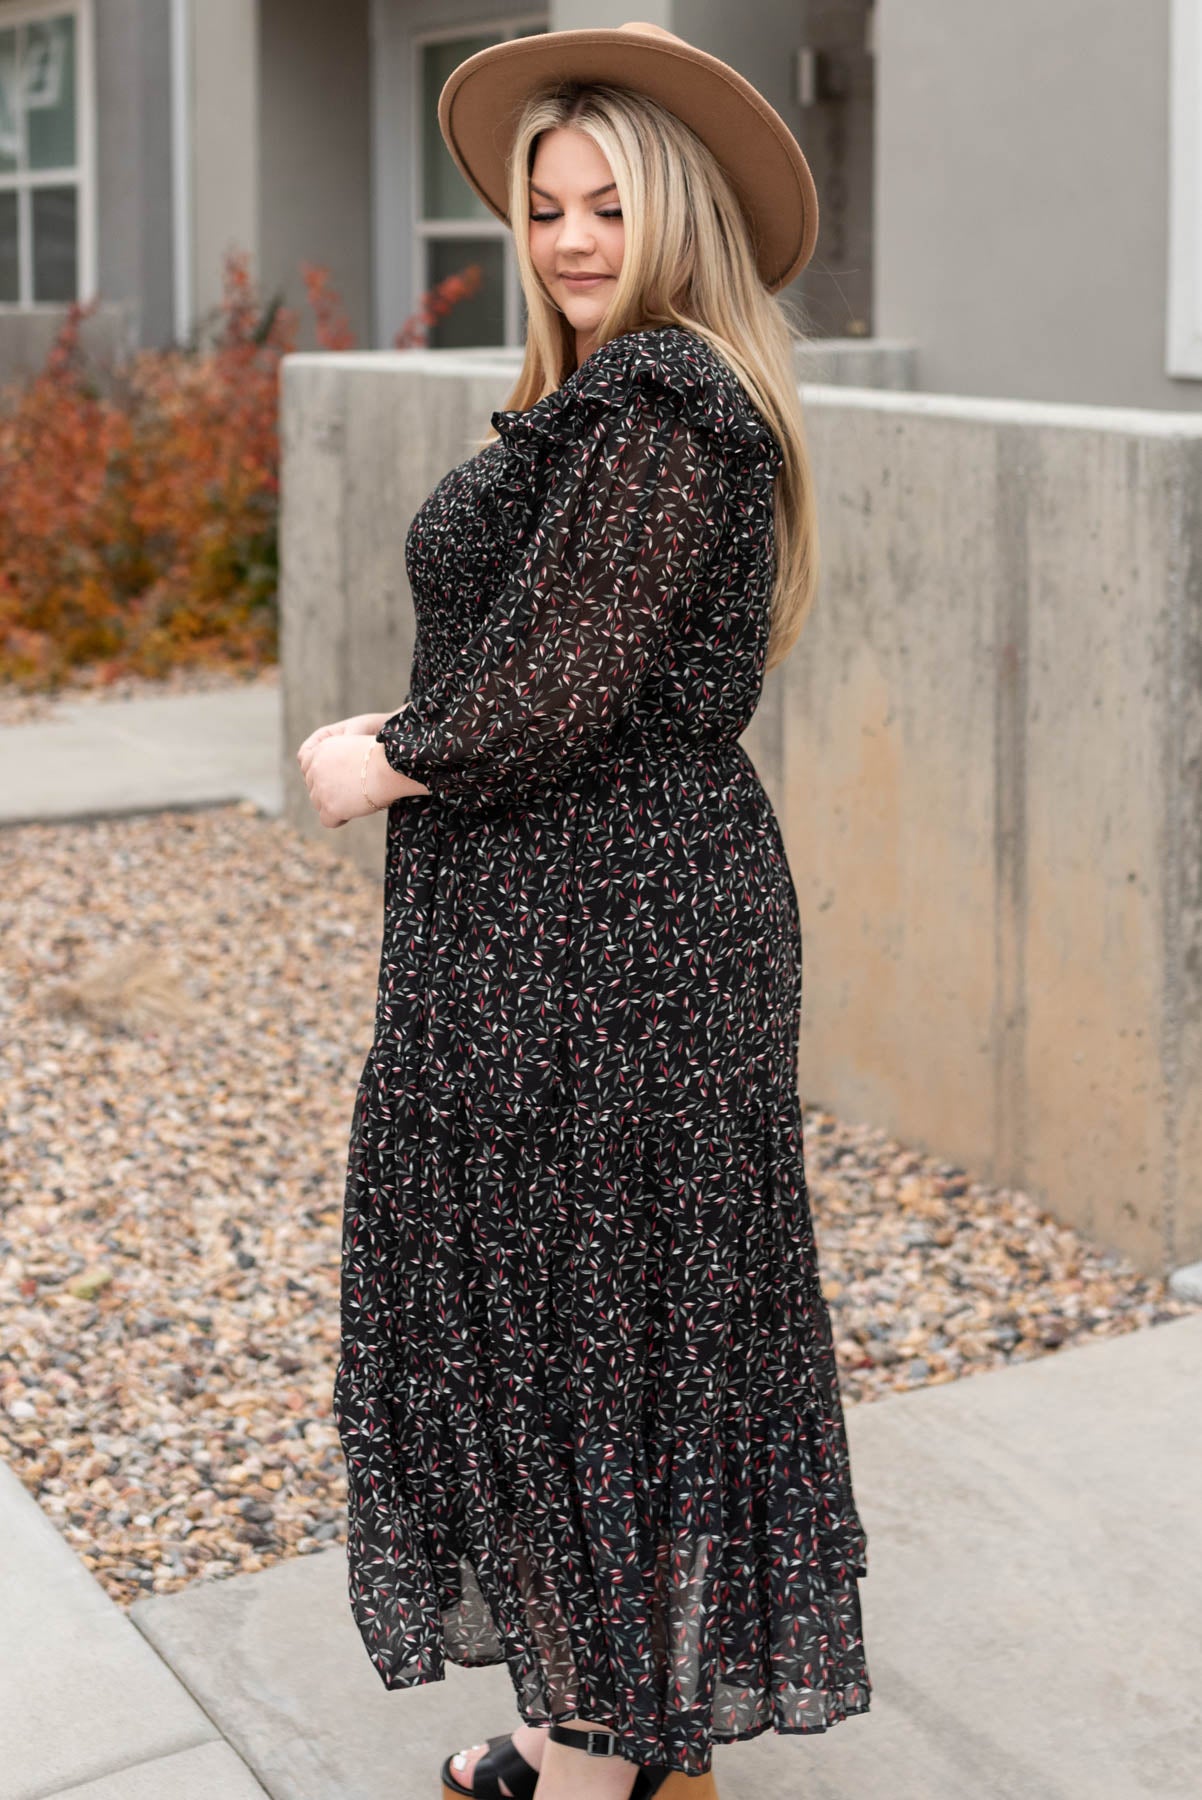 Side view of the plus size black floral dress